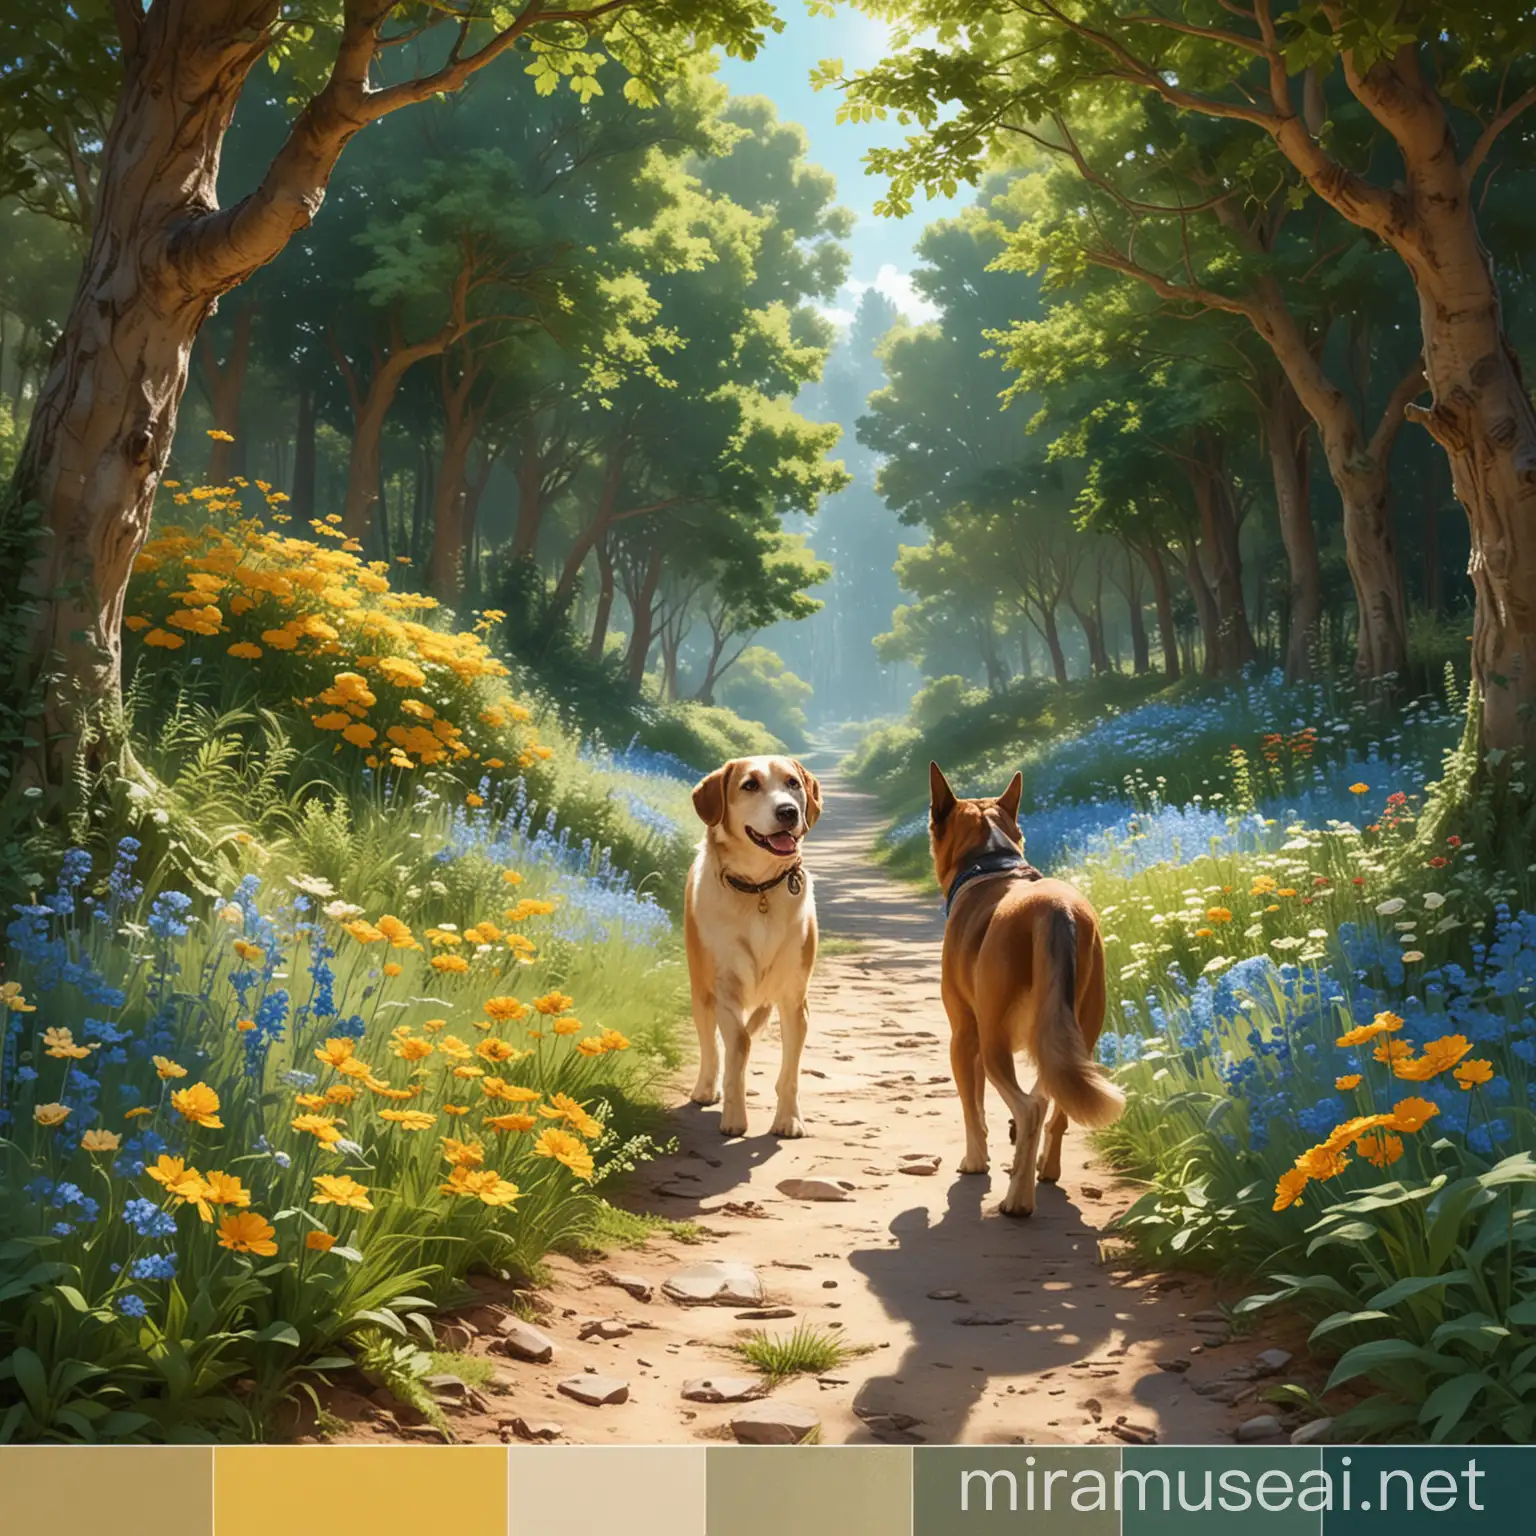 Boy and Dog Walking Through Lush Nature Companionship and Conservation